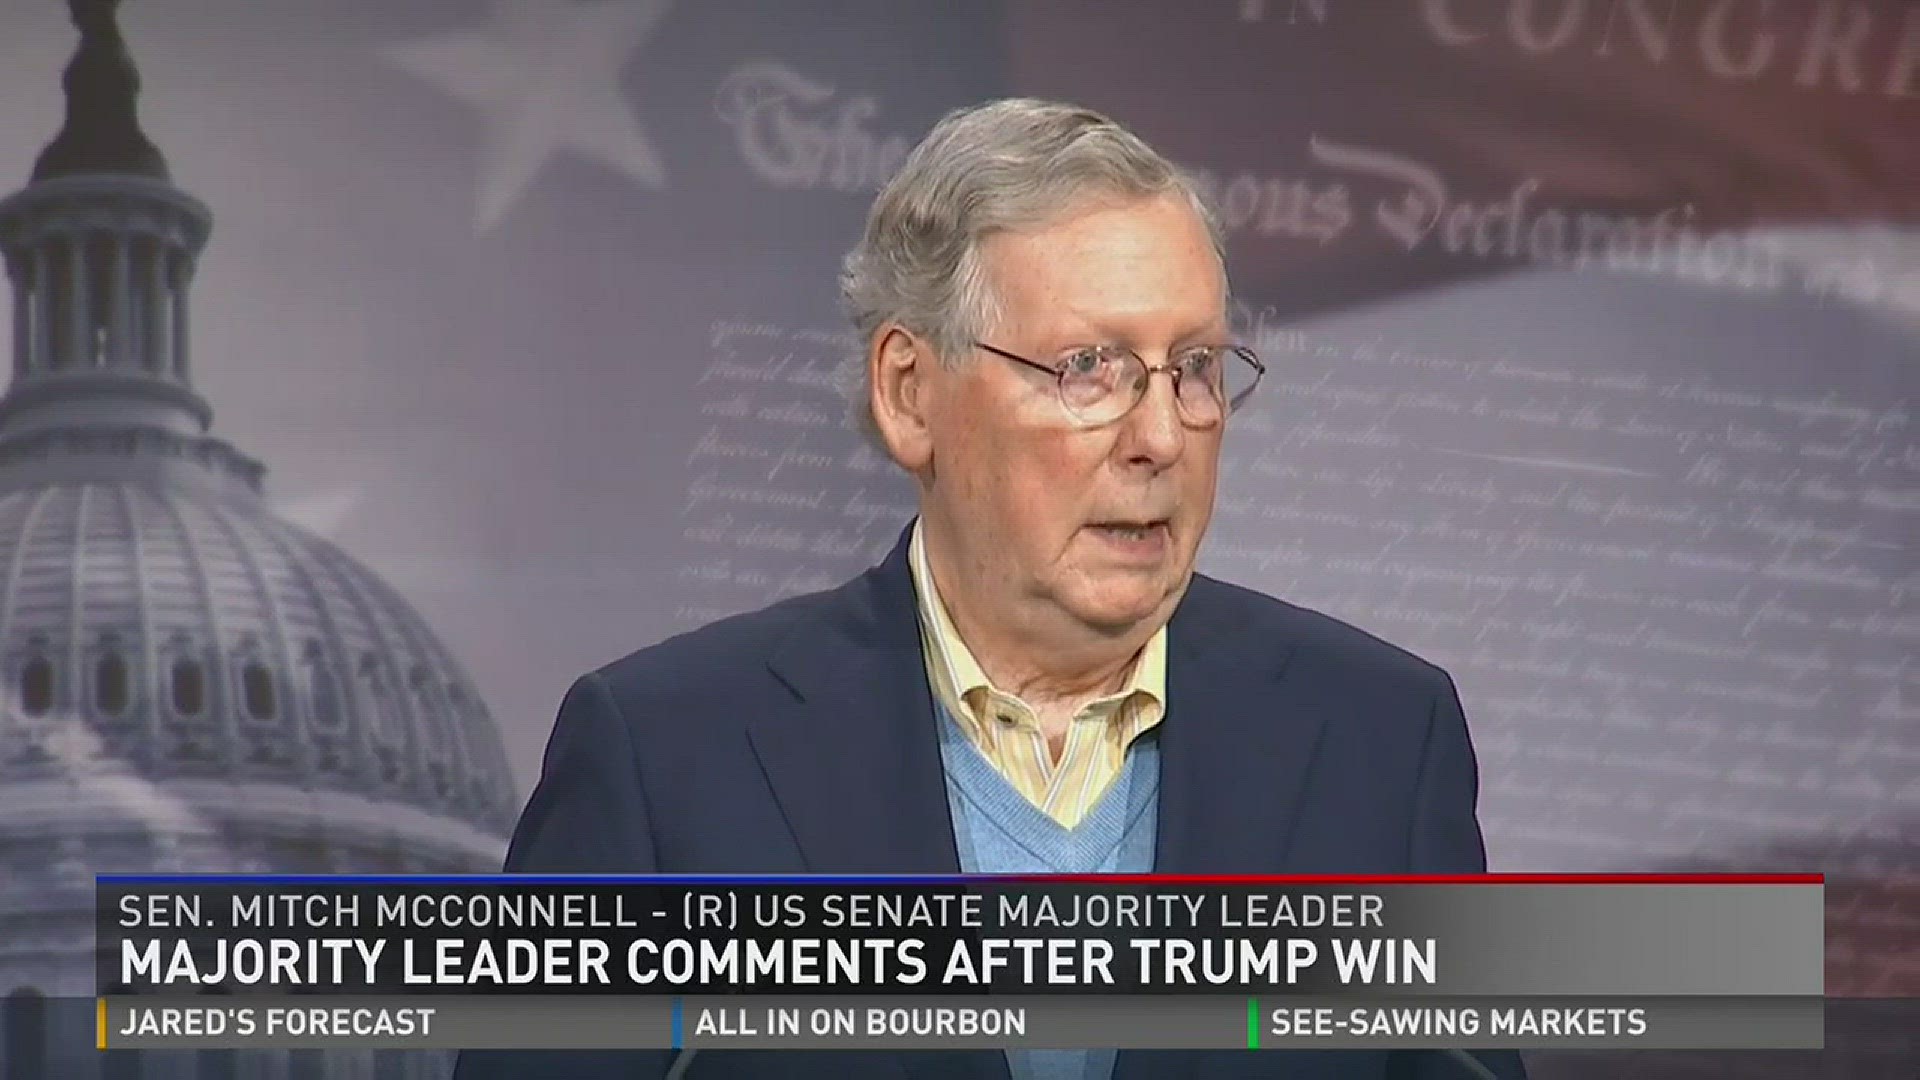 McConnell comments after Trump's win